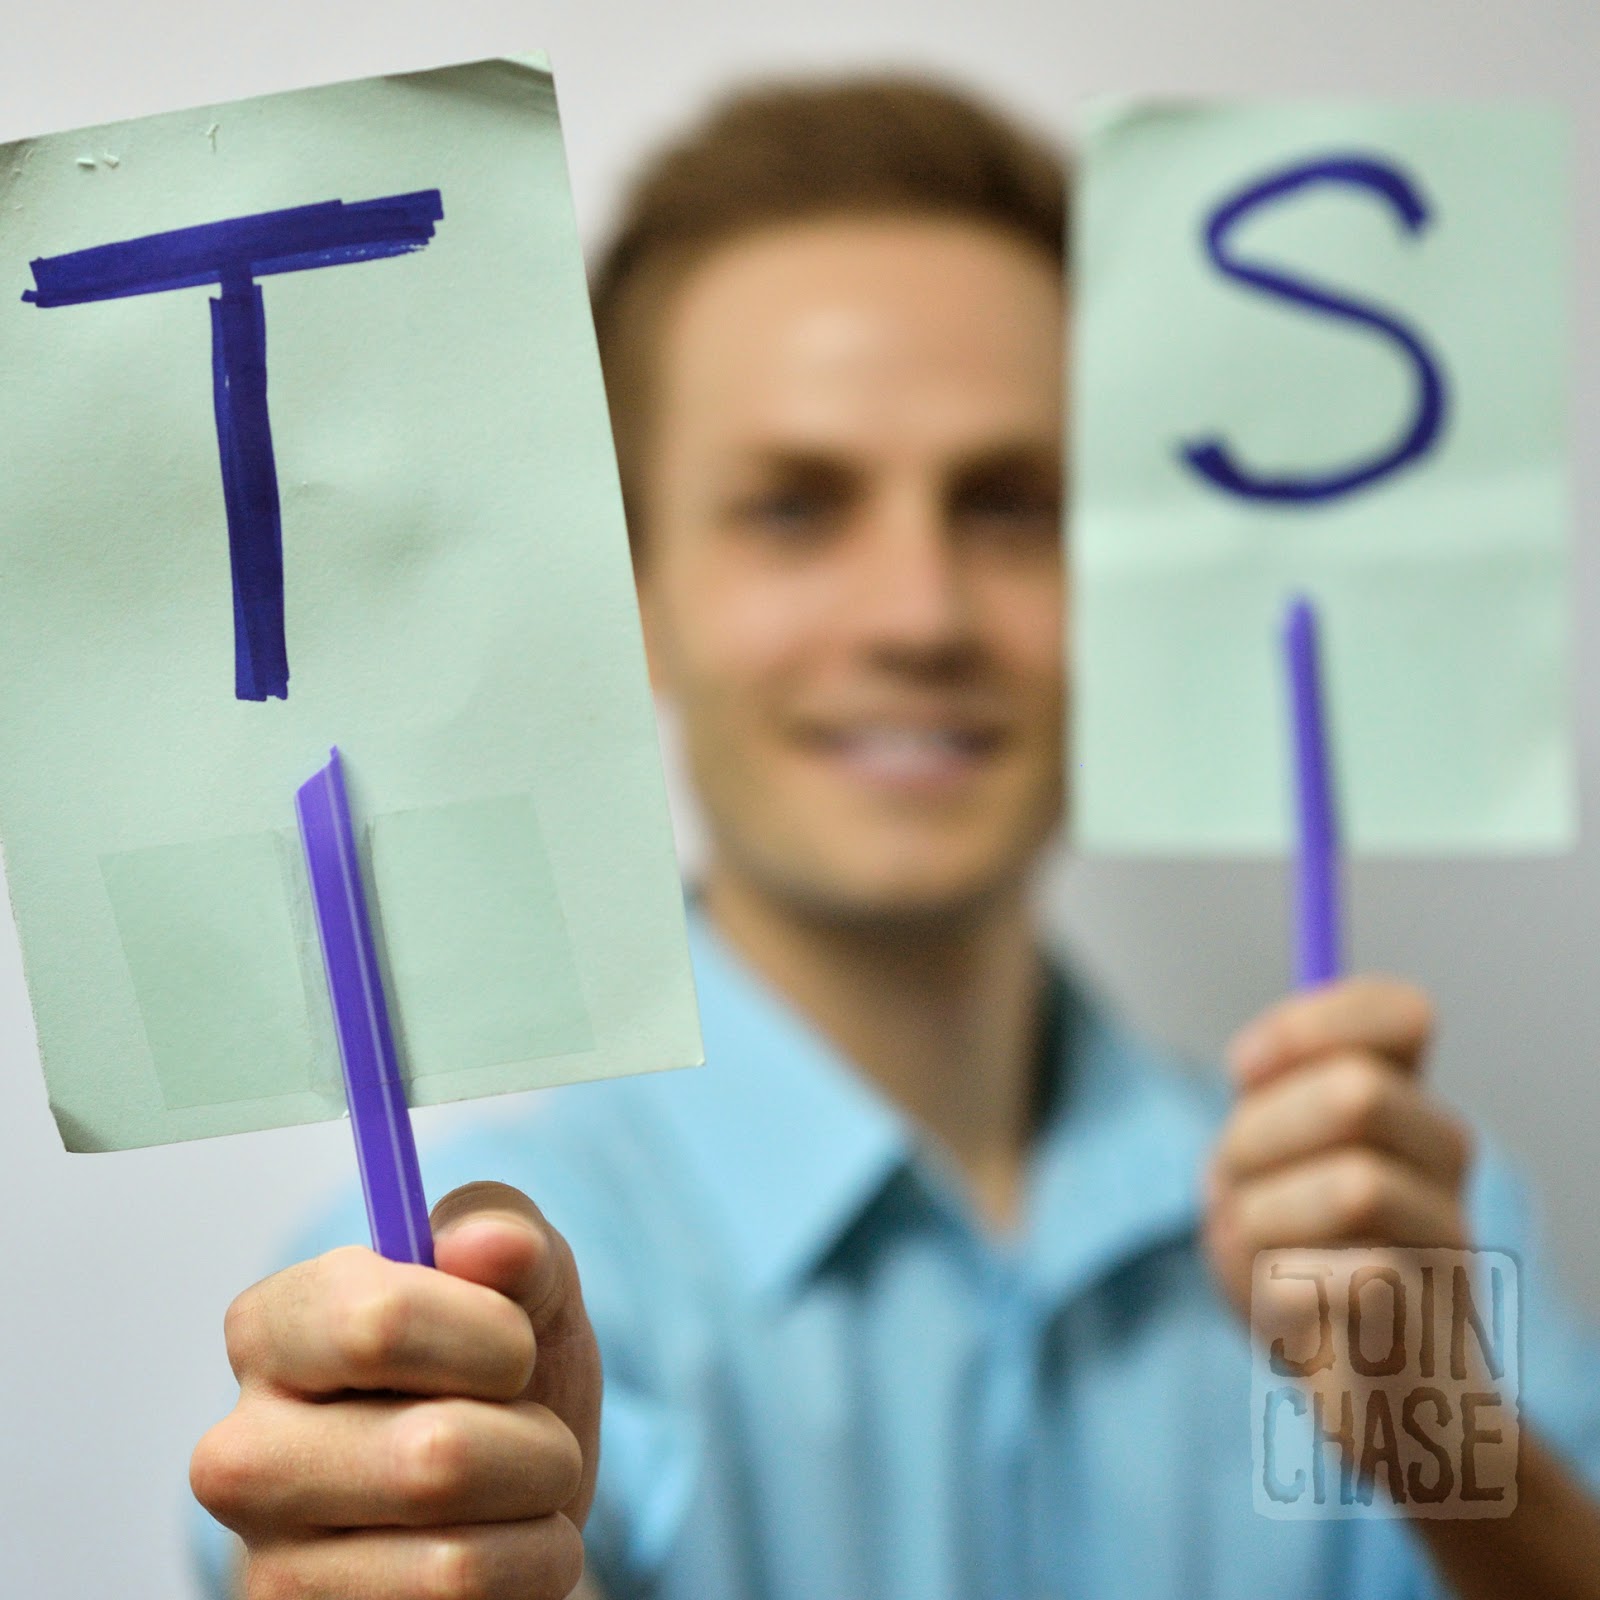 A teacher holding couplet visuals to use during the practice portion of an English lesson.